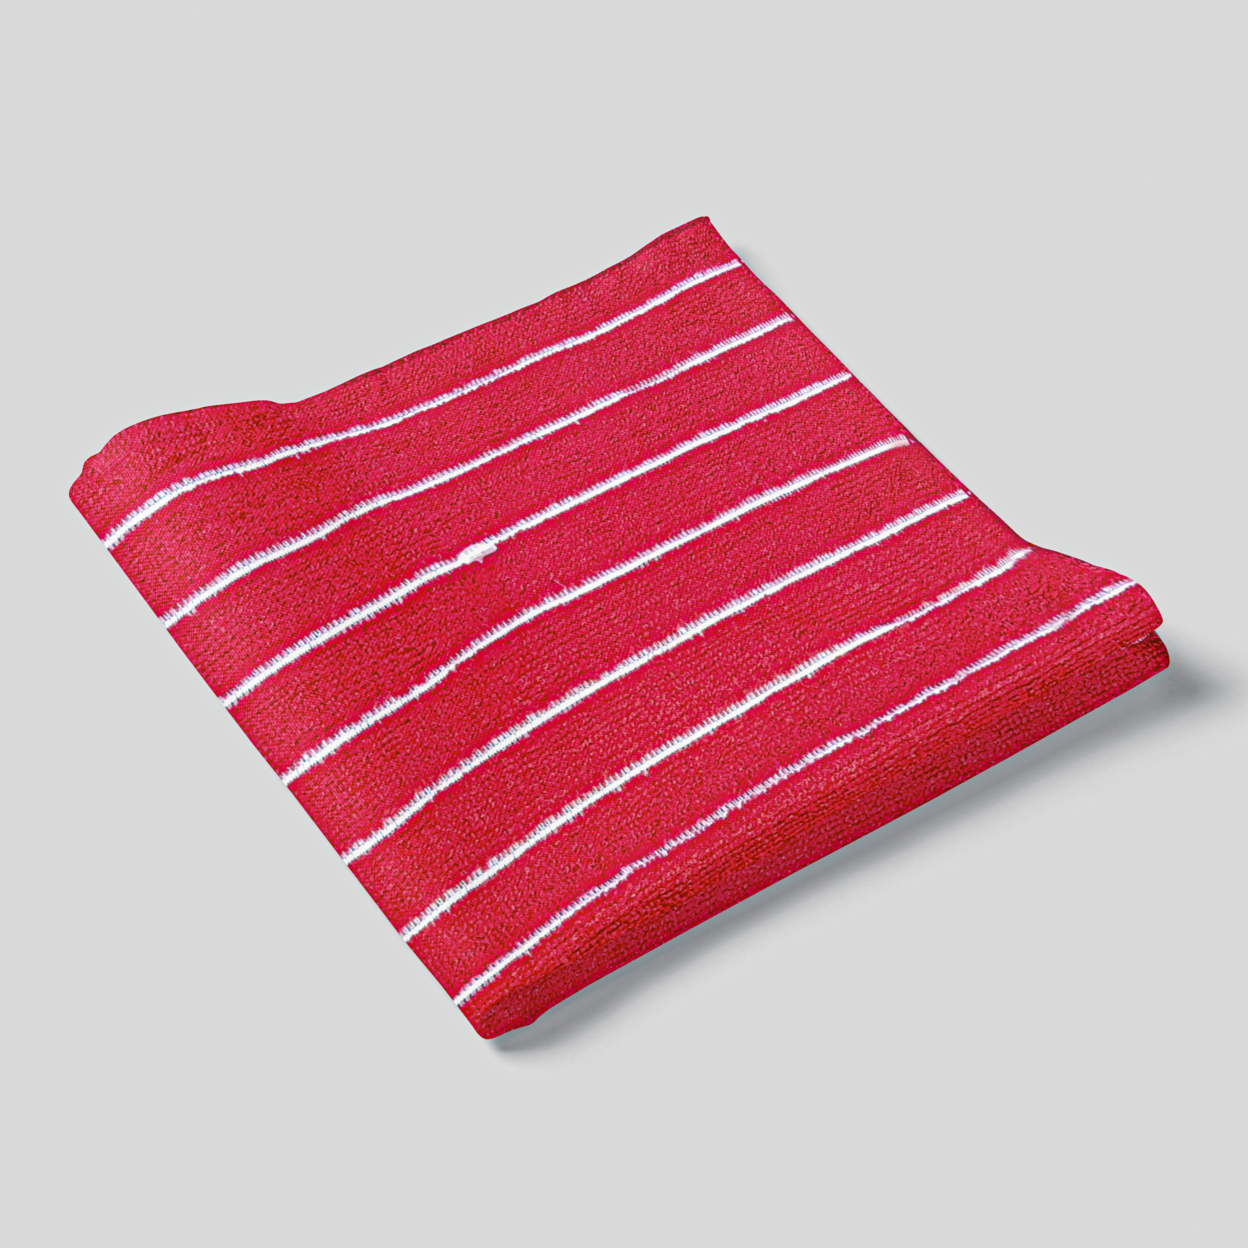 Multi-Pack Striped Super Soft And Absorbent Microfiber Dish Cloths - 6-Pack